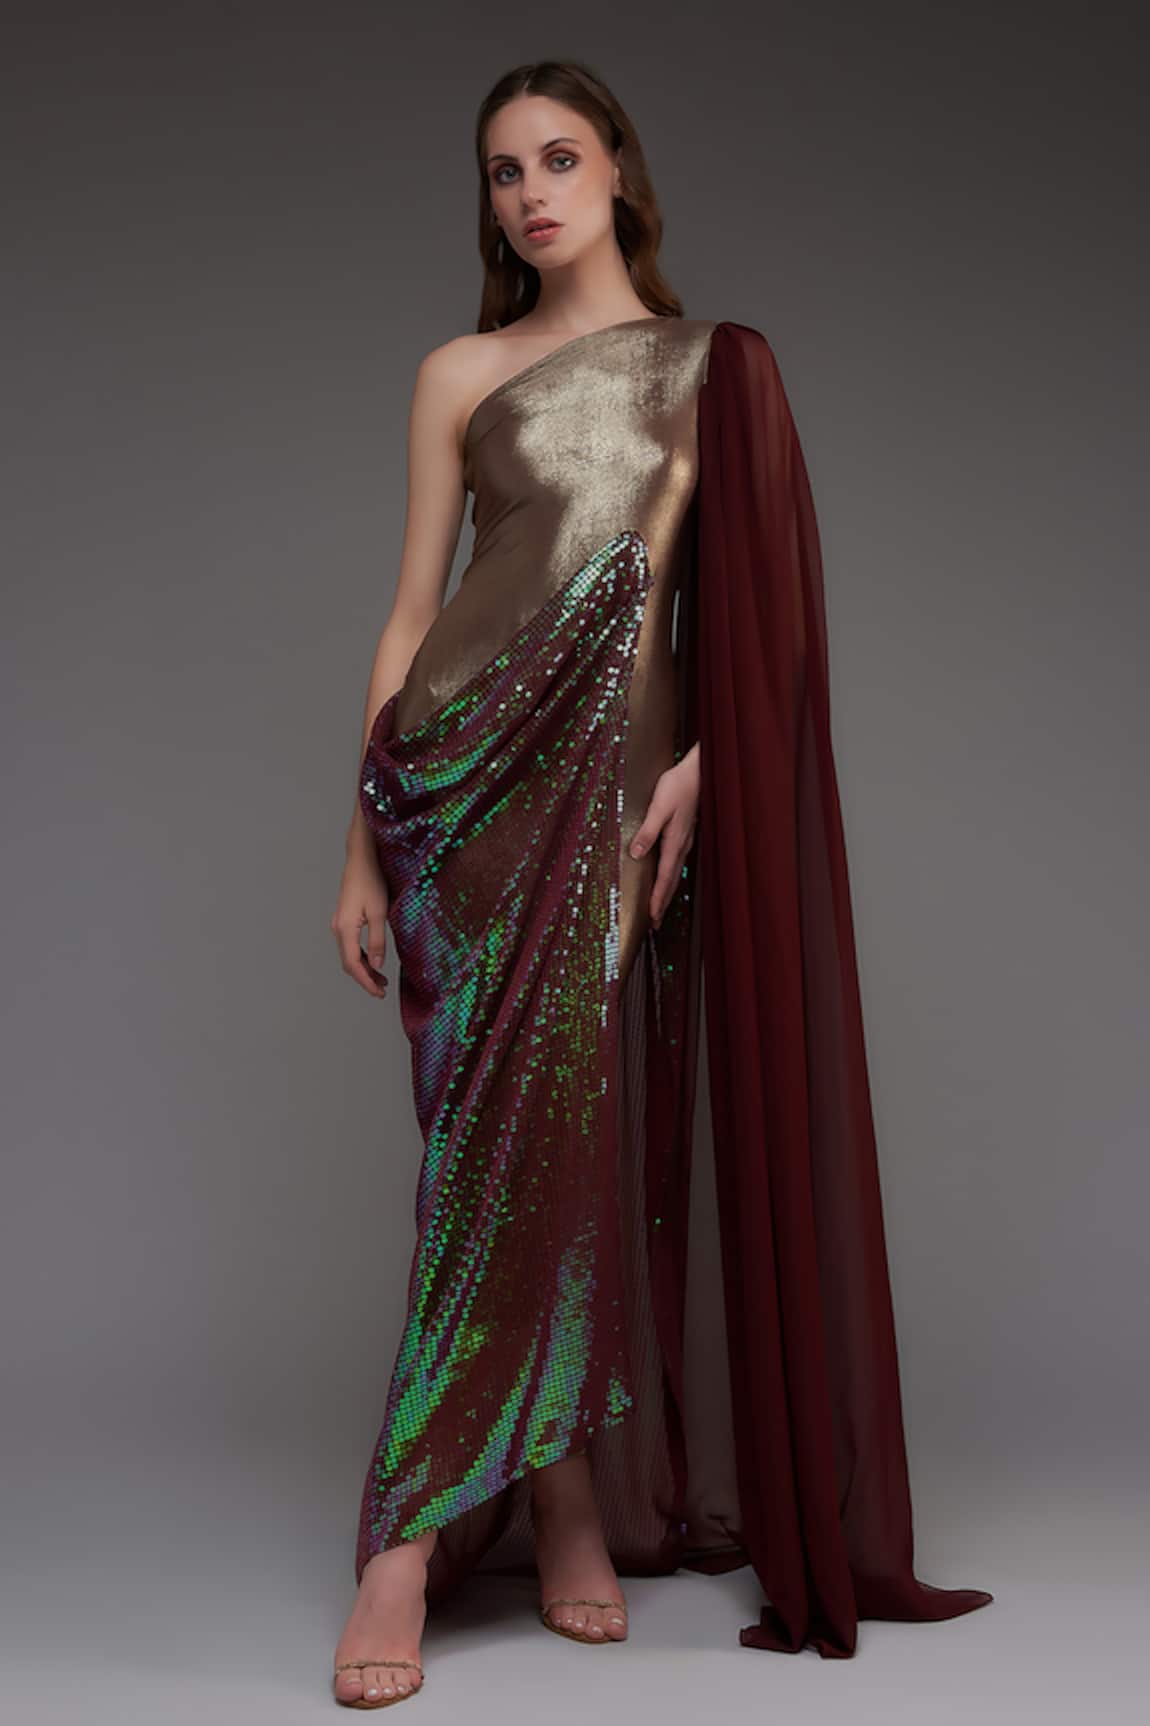 Cham Cham One Shoulder Draped Gown